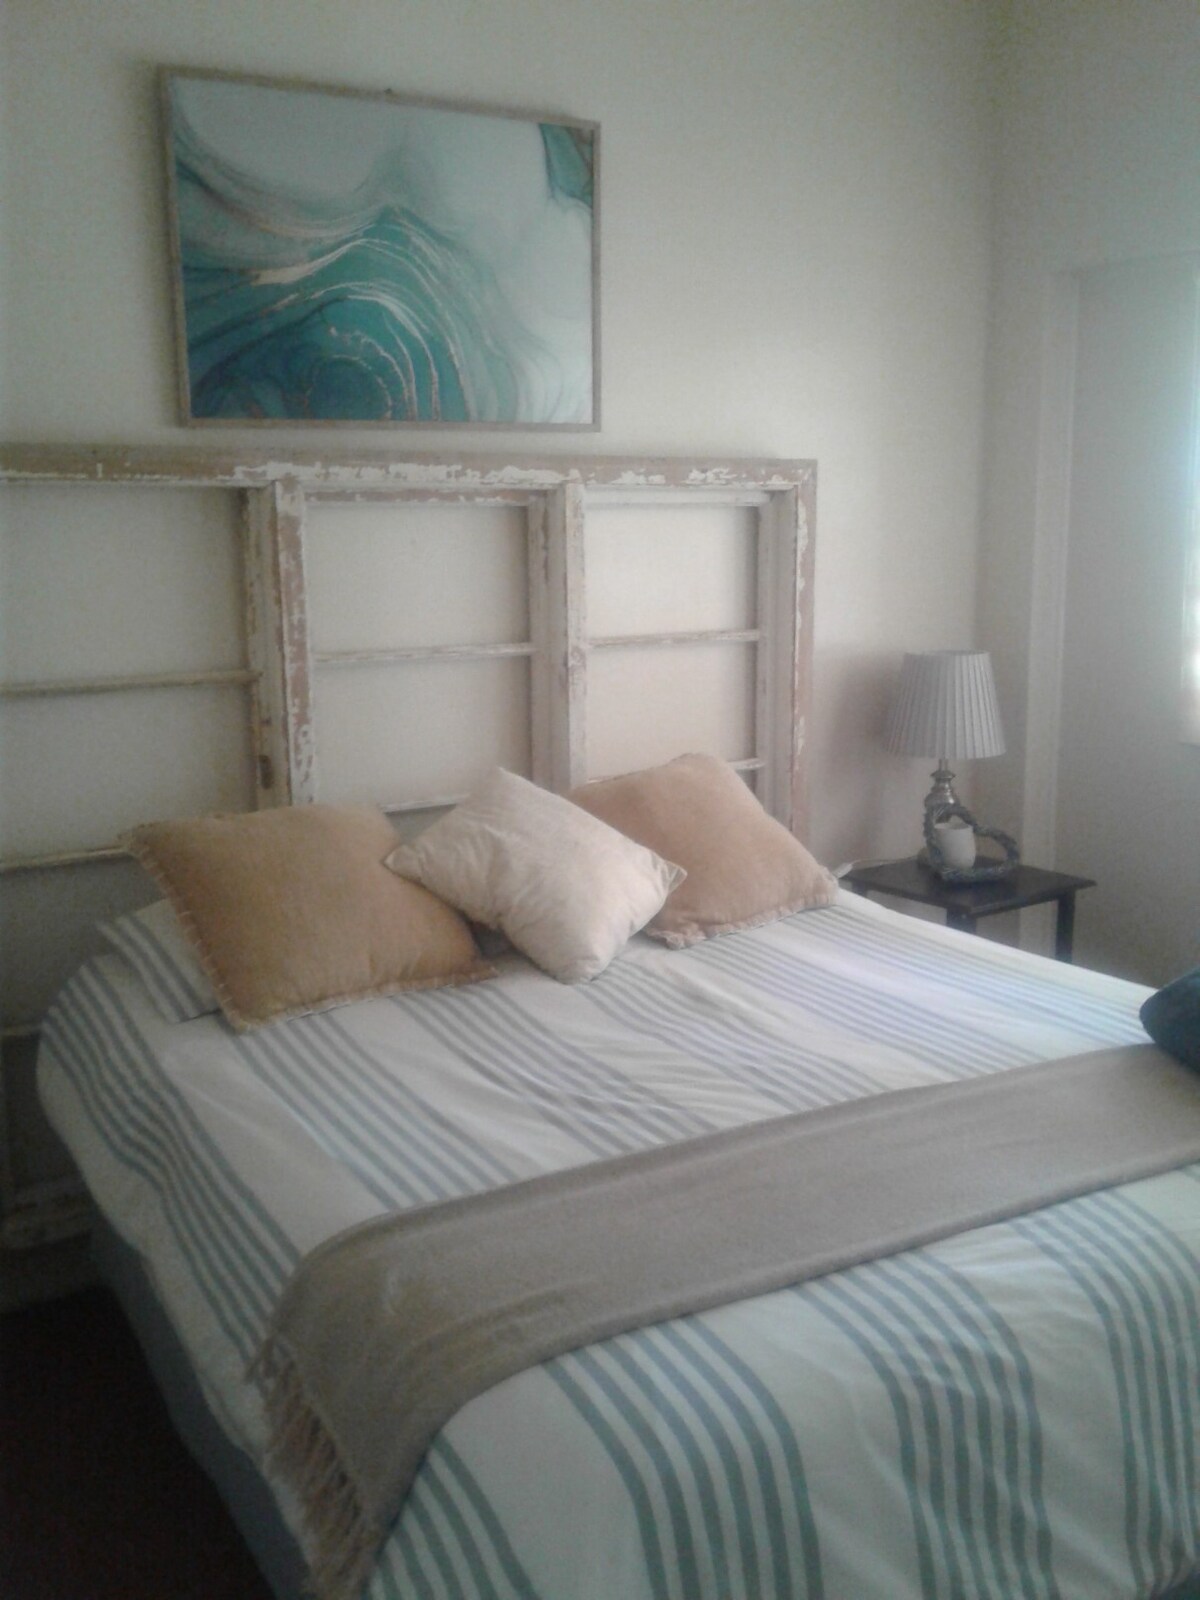 Rigtersveld 2 Rooms - Queen size beds